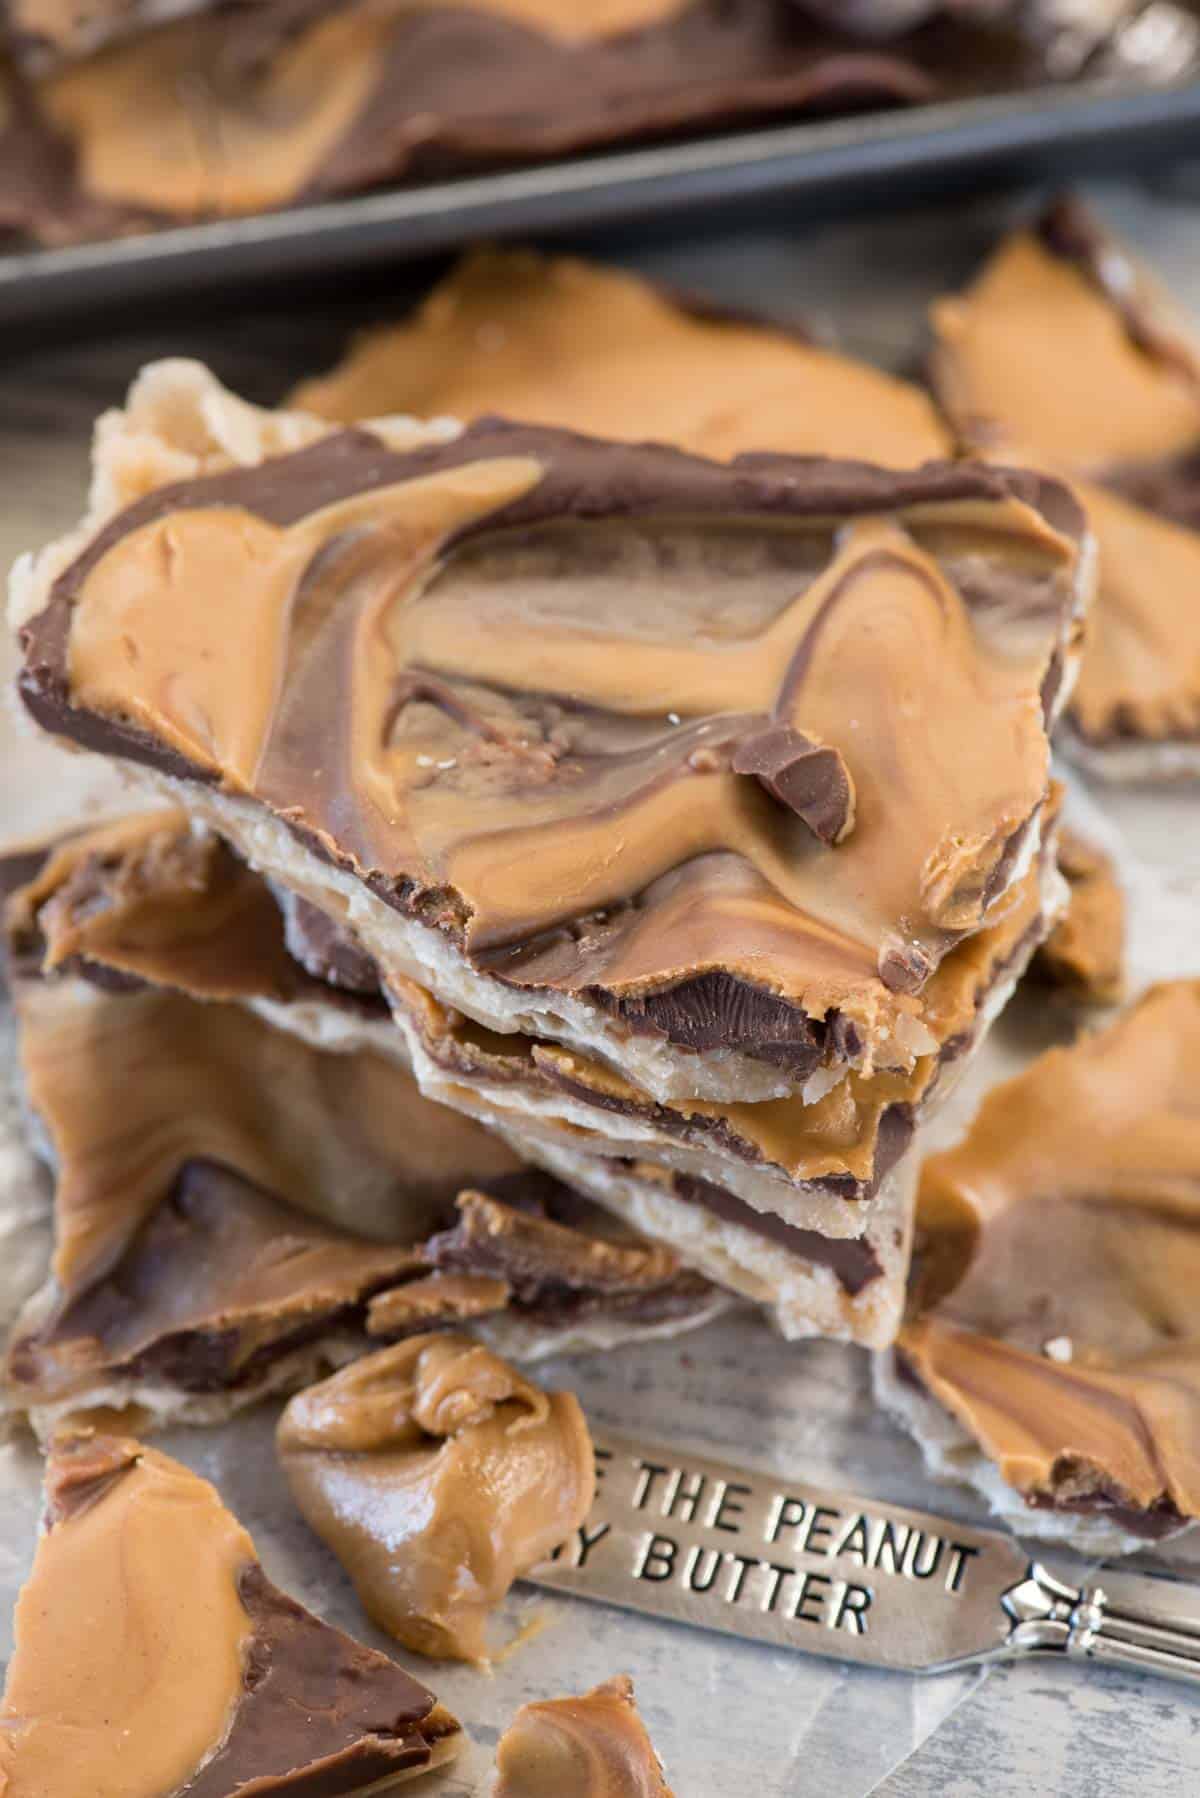 Peanut Butter Toffee Bark - this is the perfect crack bark recipe! Homemade toffee is baked on matzo crackers and topped with lots of chocolate and peanut butter. It's pure heaven and EVERYONE raves about it.